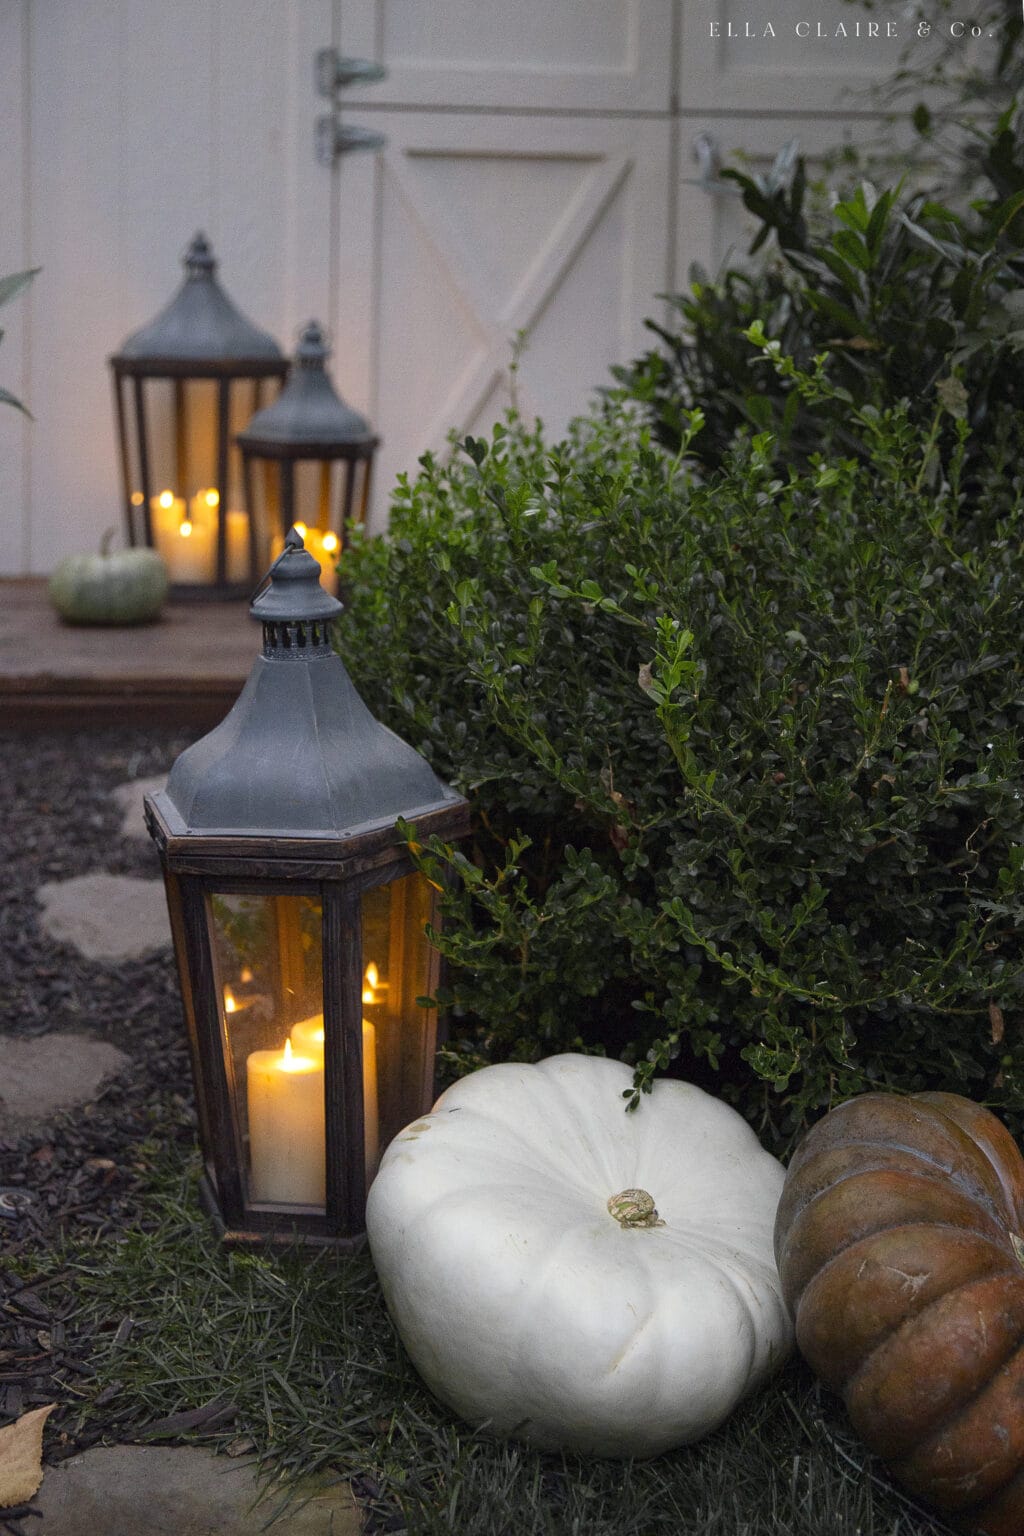 Fall Table By Candlelight | Outdoor Fall Decorations - Ella Claire & Co.